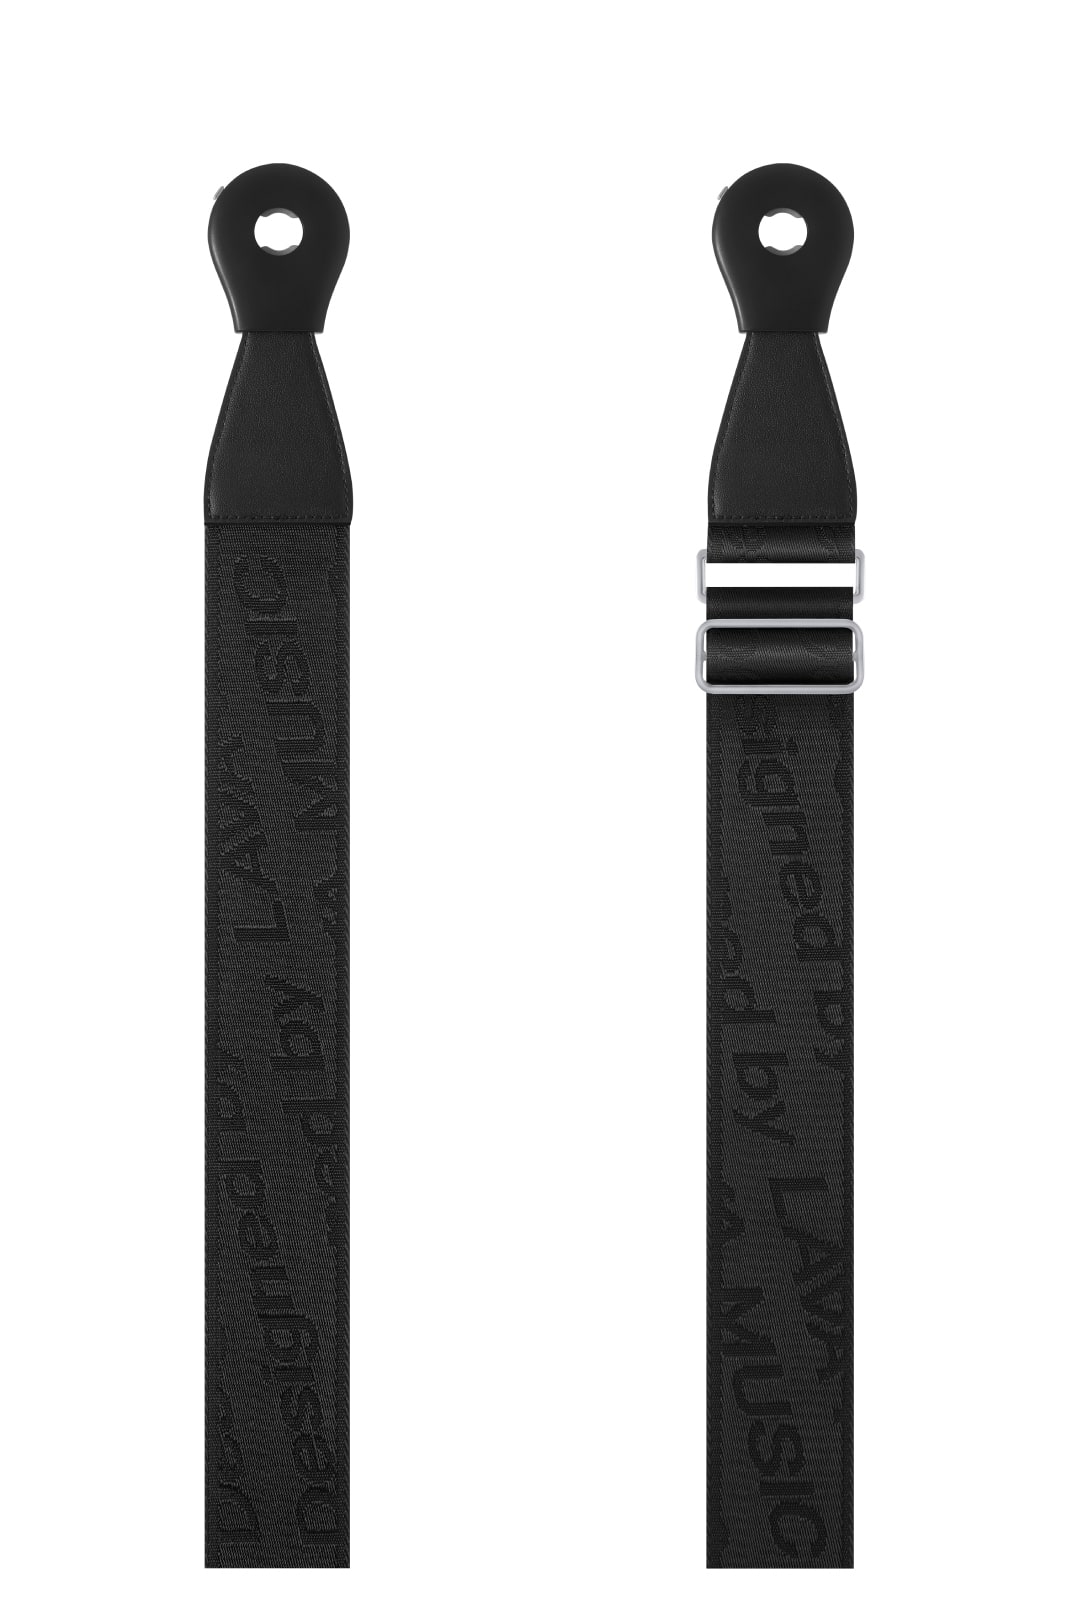 LAVA MUSIC IDEAL STRAP 2 FOR LAVA ME PLAY - WOVEN BLACK